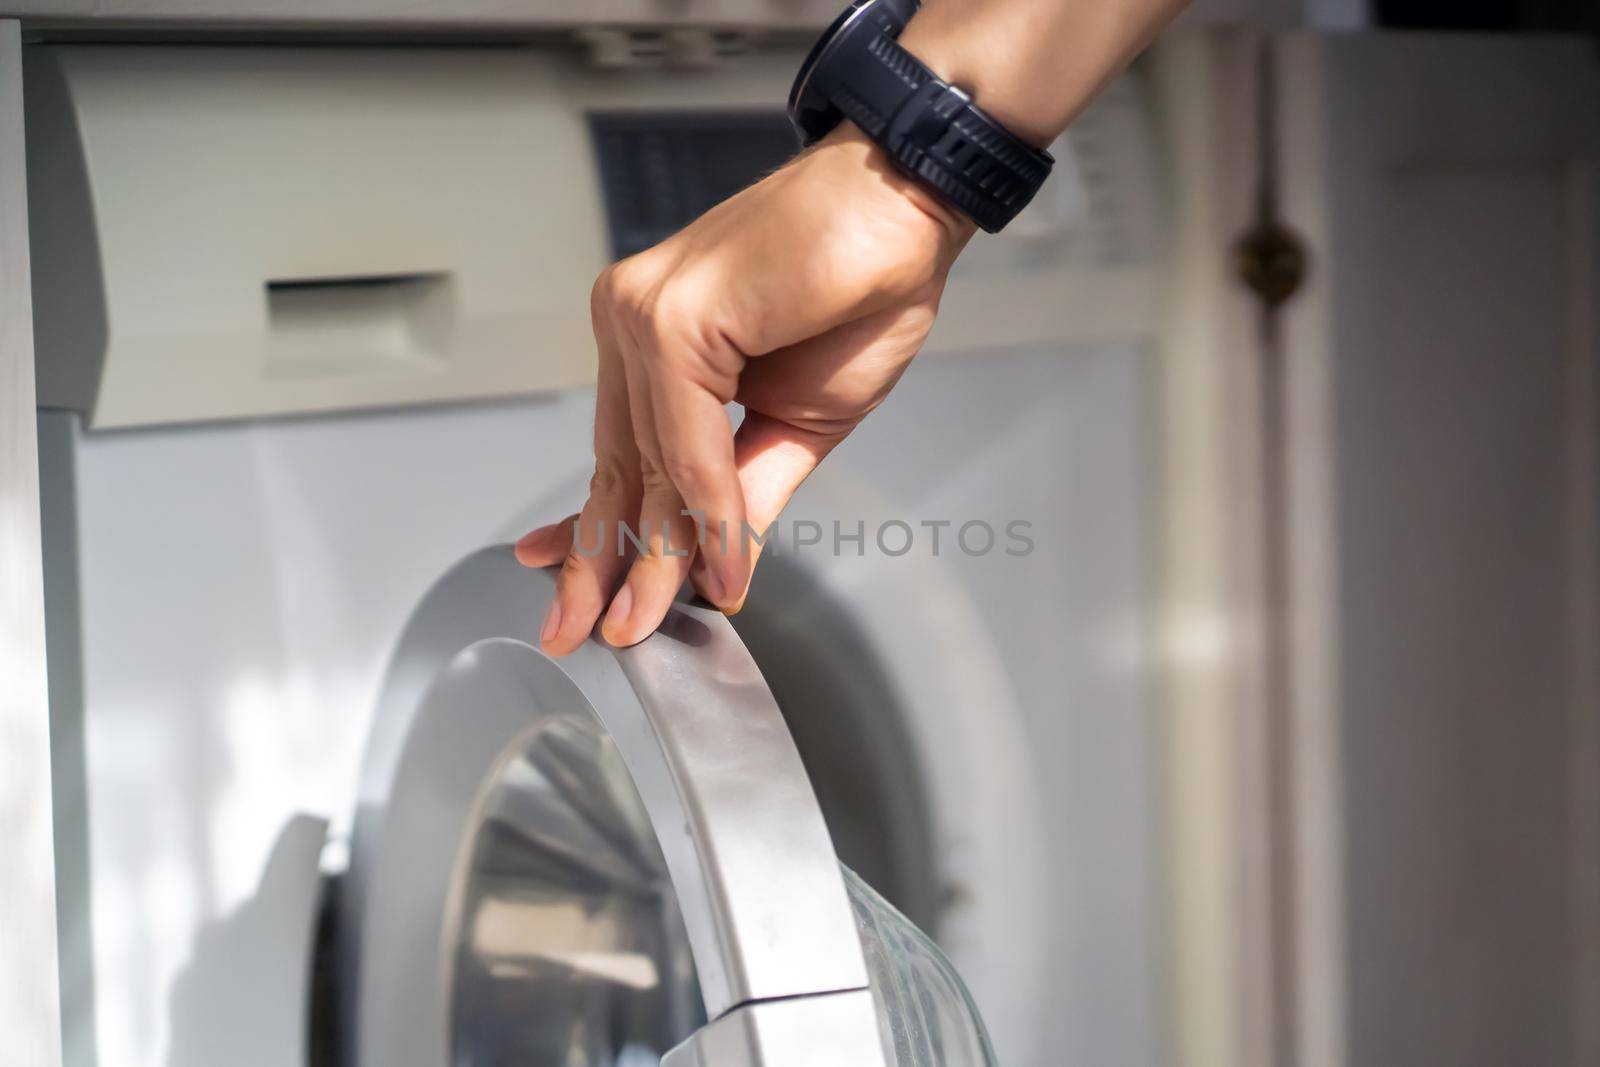 A male hand opens the door of a new washing machine in his modern, bright bathroom, close-up. The man washes clothes in the laundry.